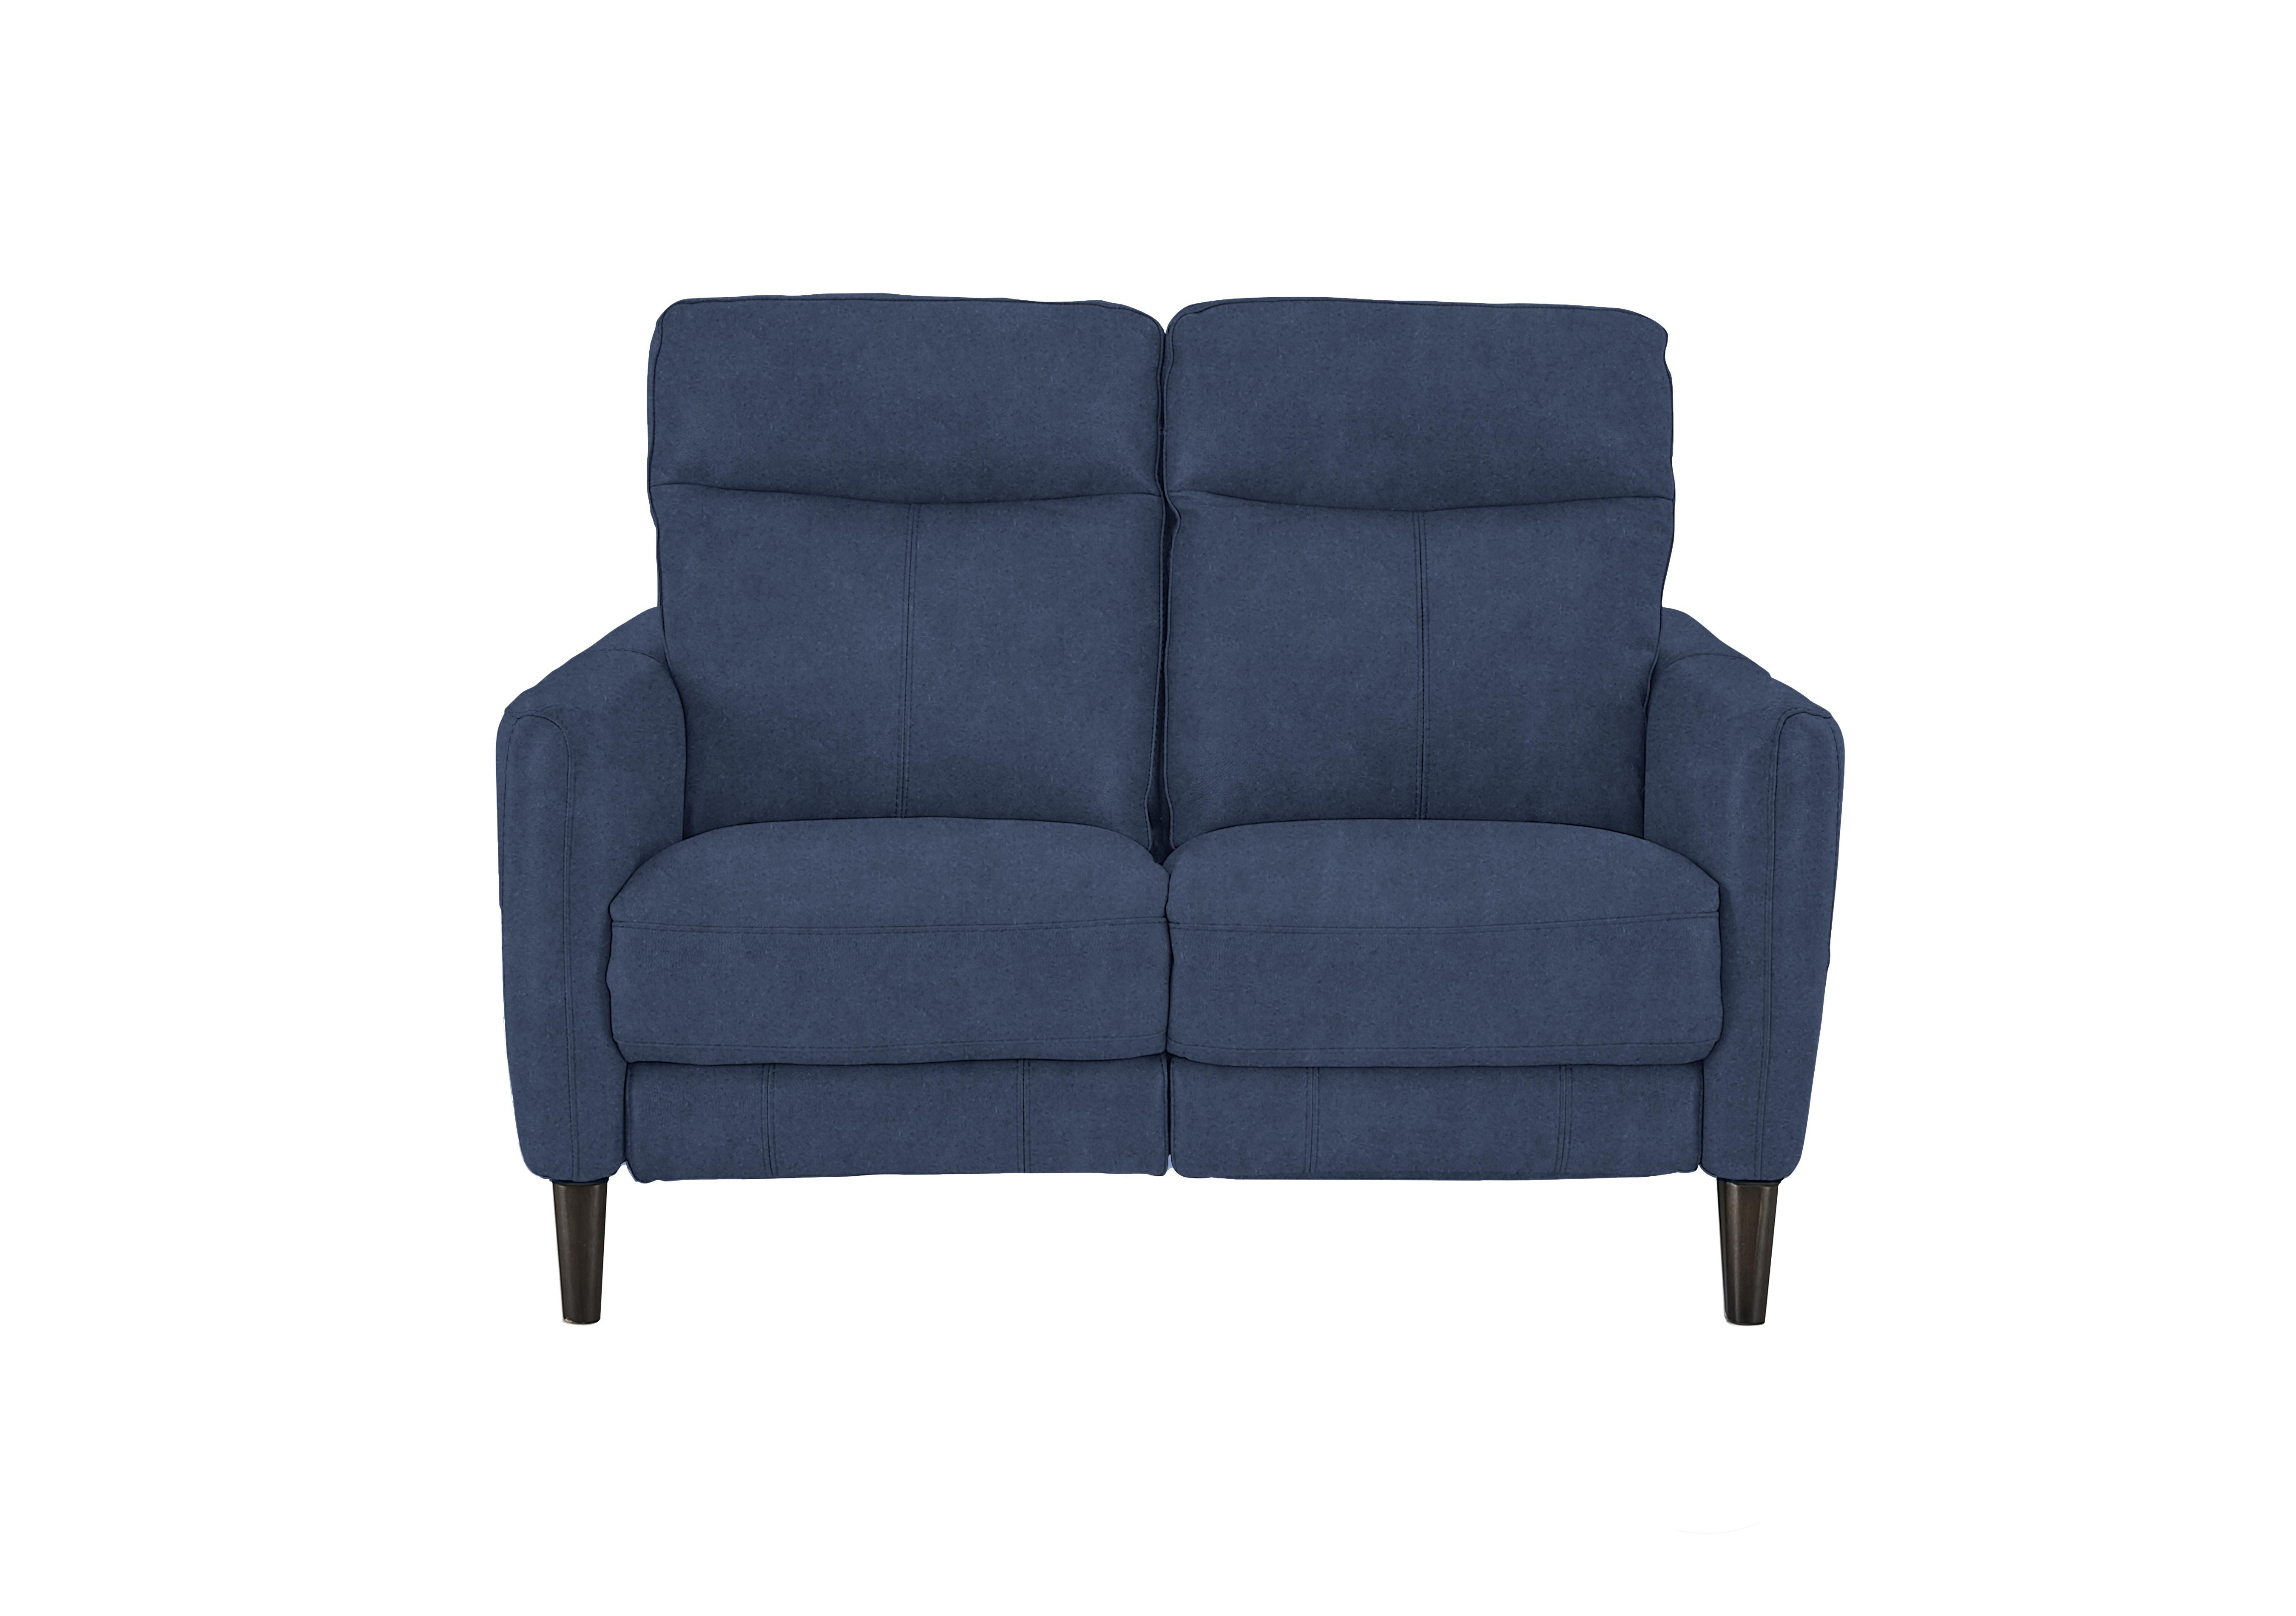 Compact Collection Petit 2 Seater Fabric Sofa in Bfa-Blj-R10 Blue on Furniture Village